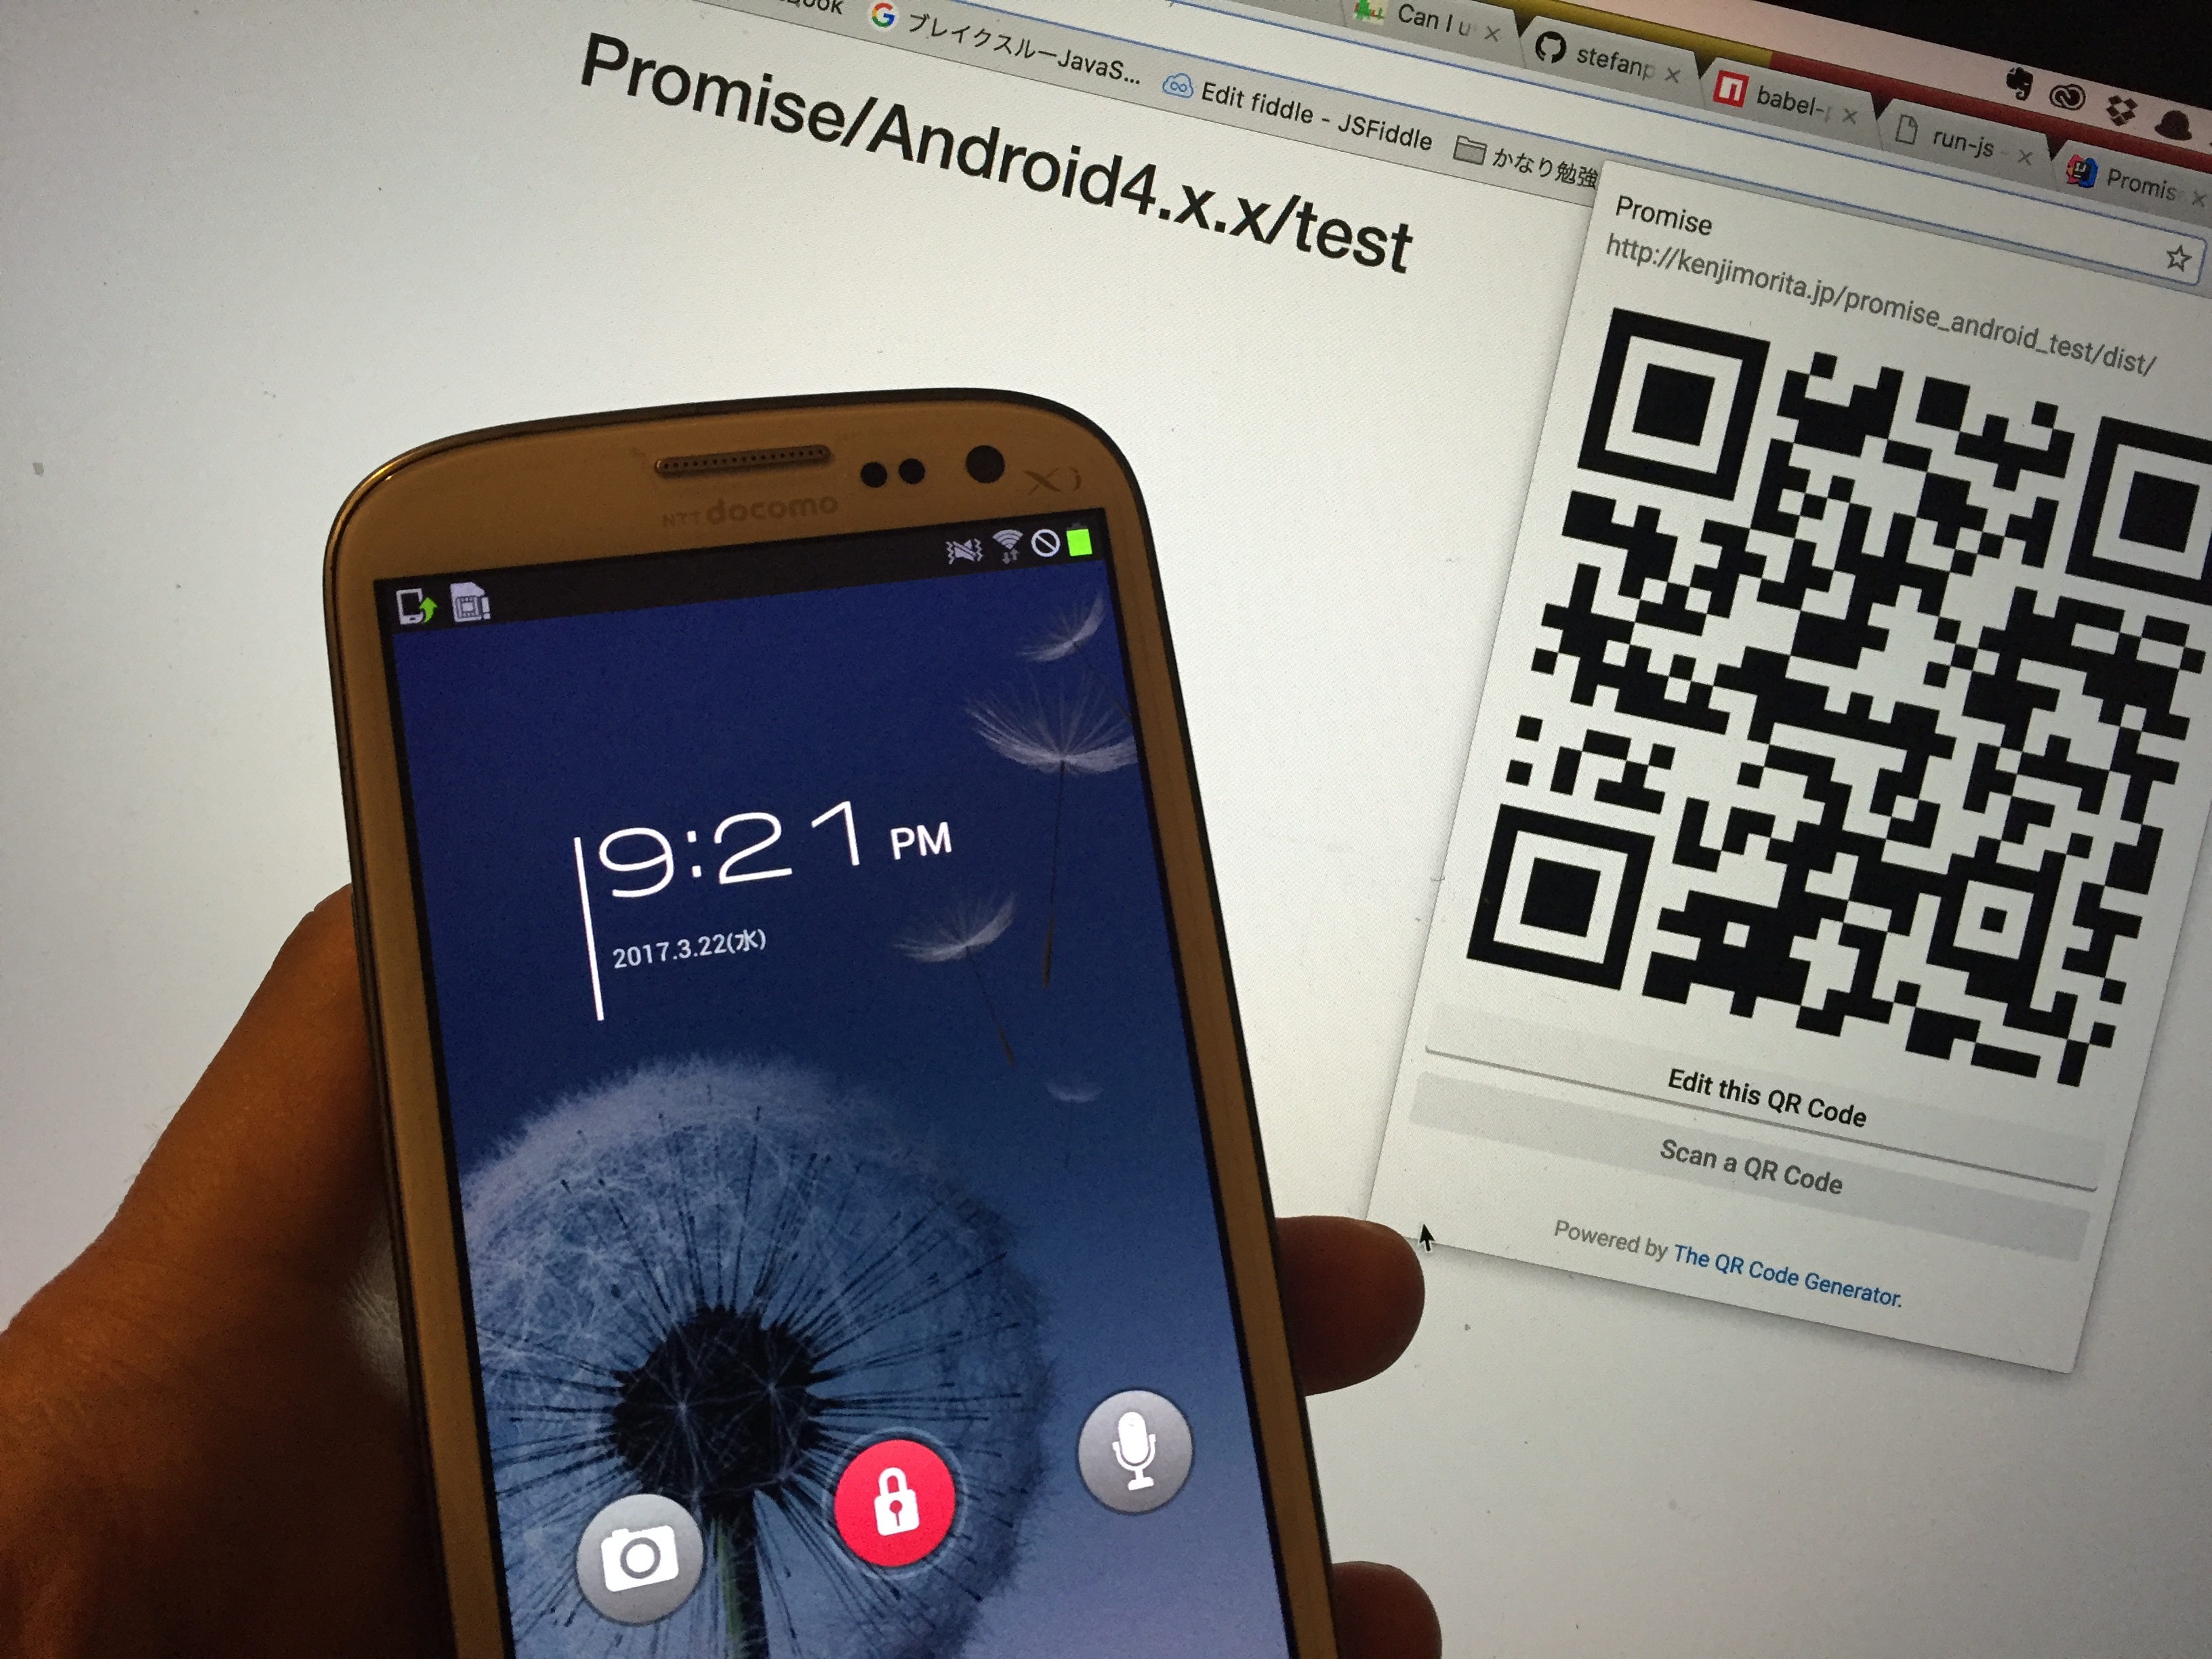 PromiseをAndroid4.xに対応させる方法(promise-polyfill)I want to use Promise for Android4.x.x!!!